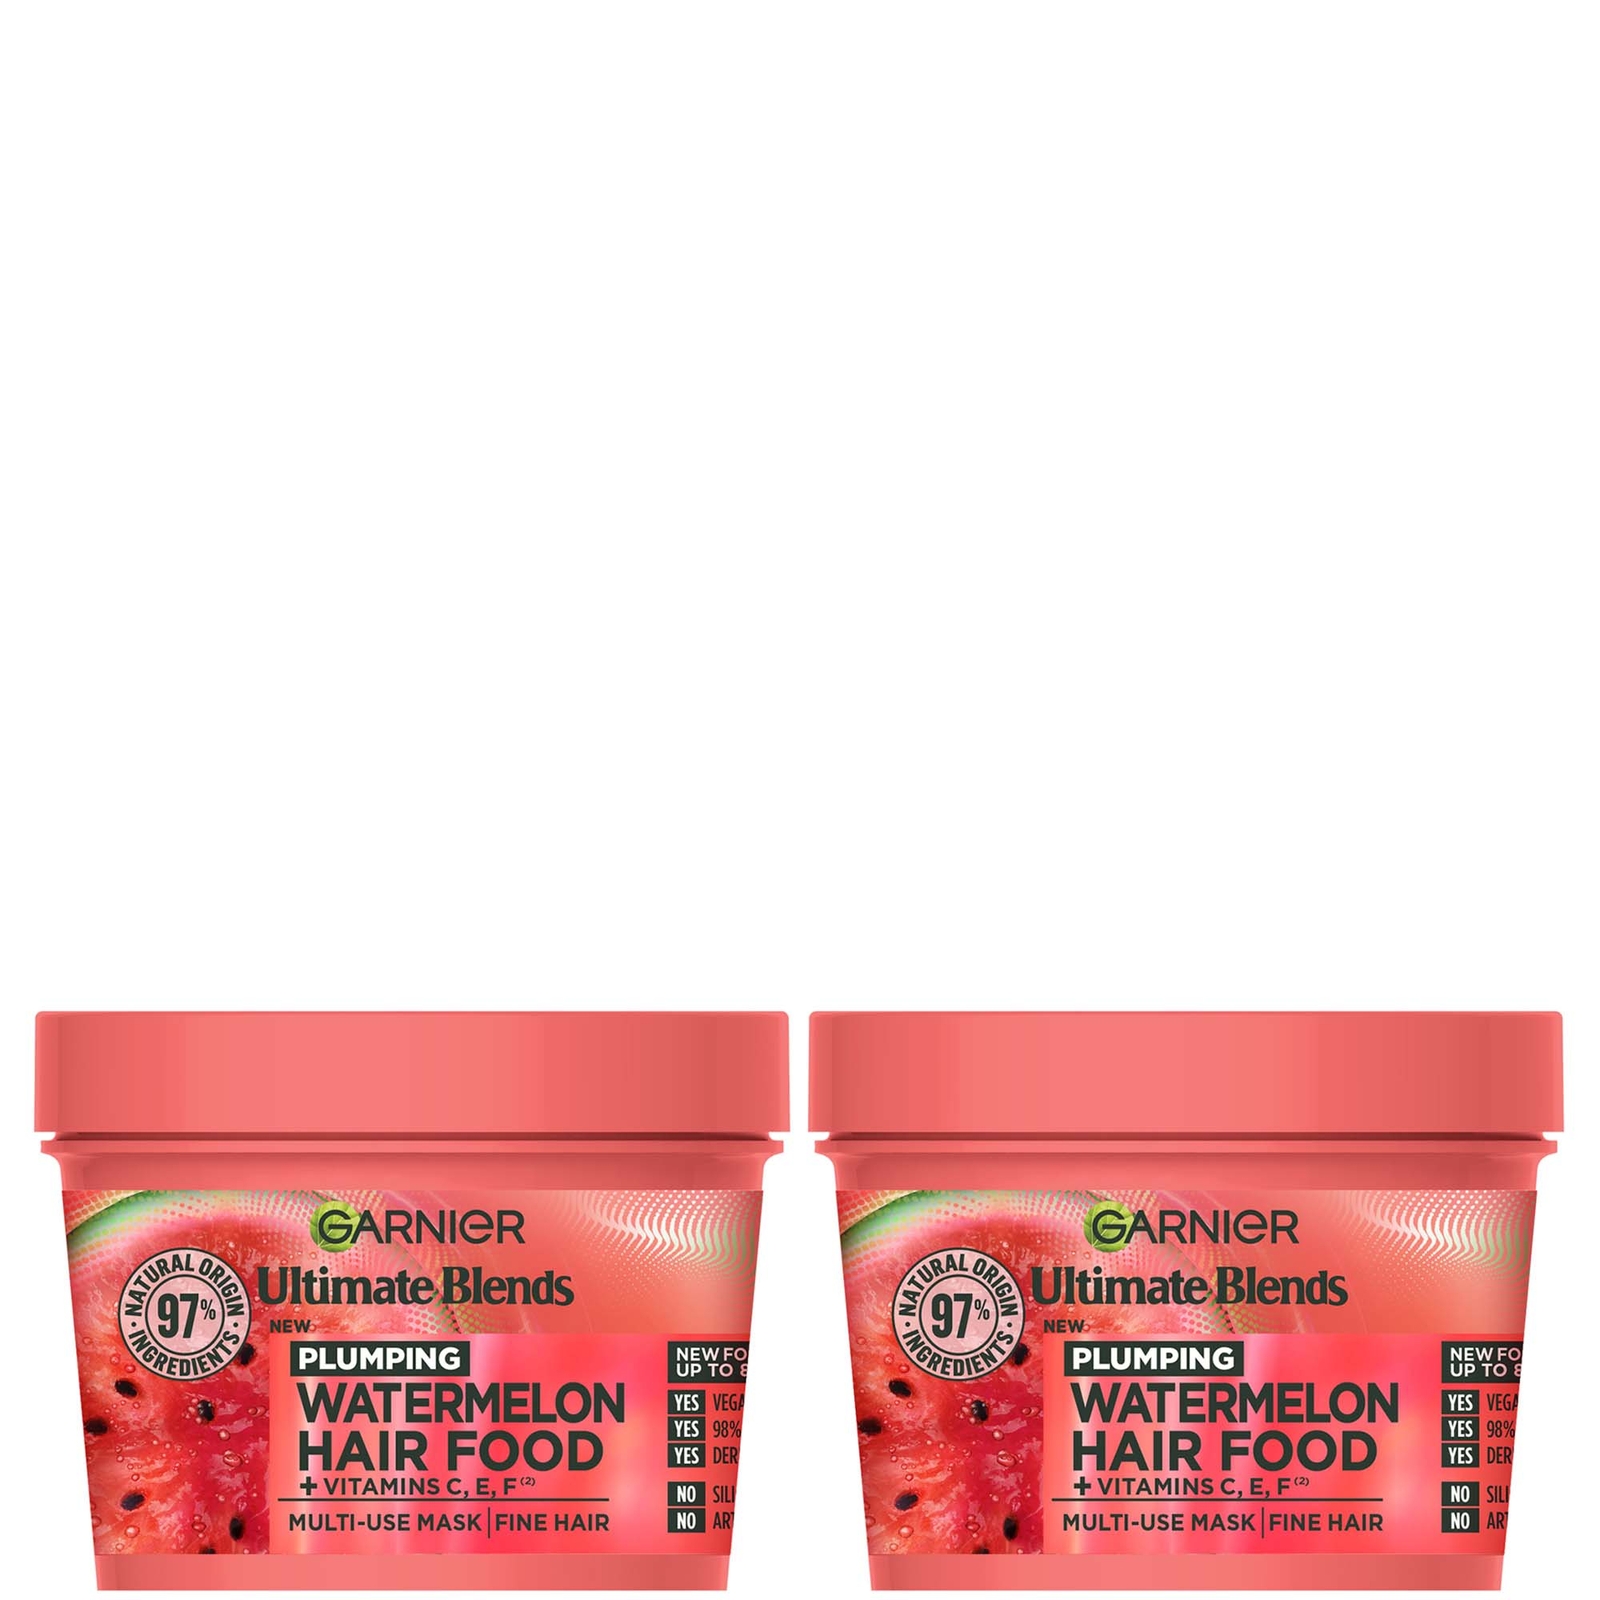 Image of Garnier Ultimate Blends Watermelon 3-in-1 Plumping Hair Mask Duo